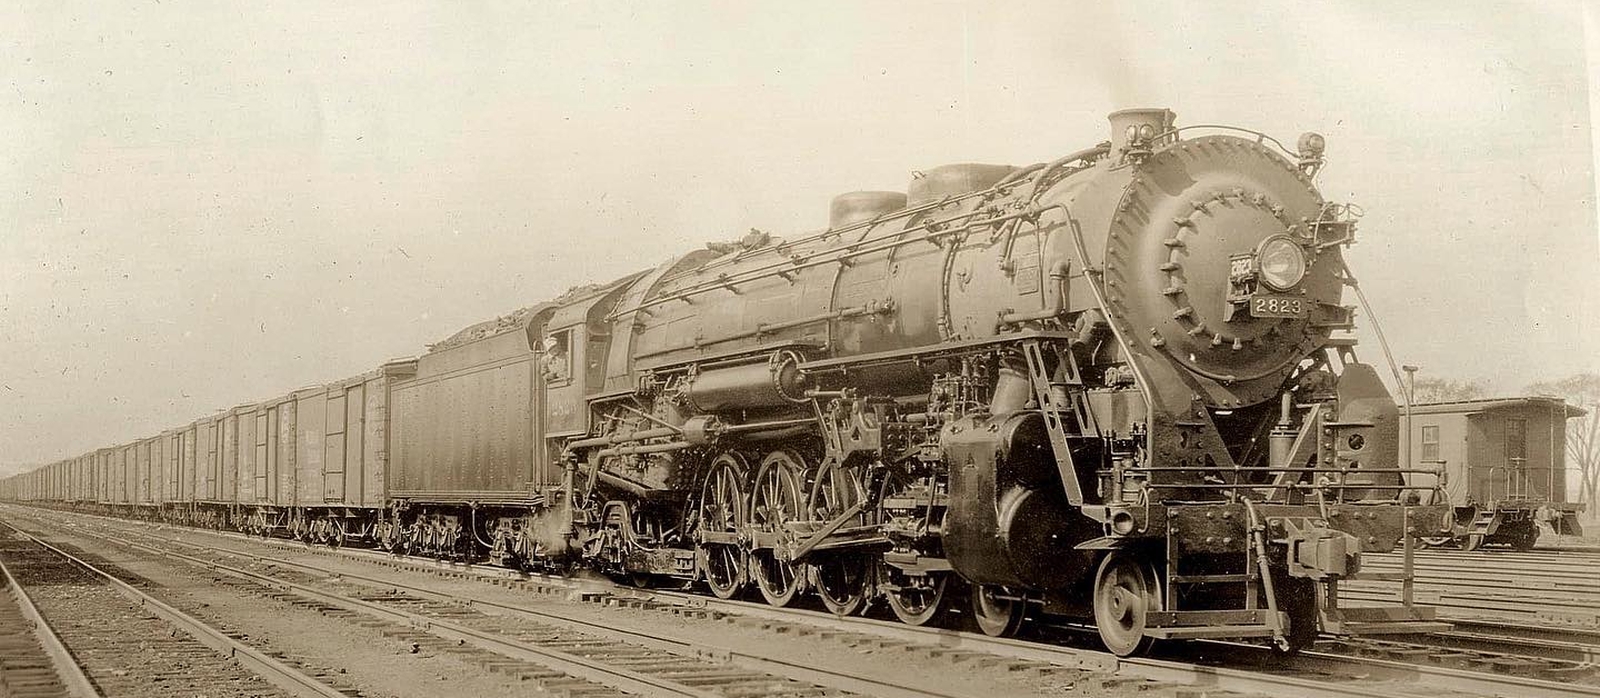 L-2c Nr. 2823 with a long freight train consisting of boxcars